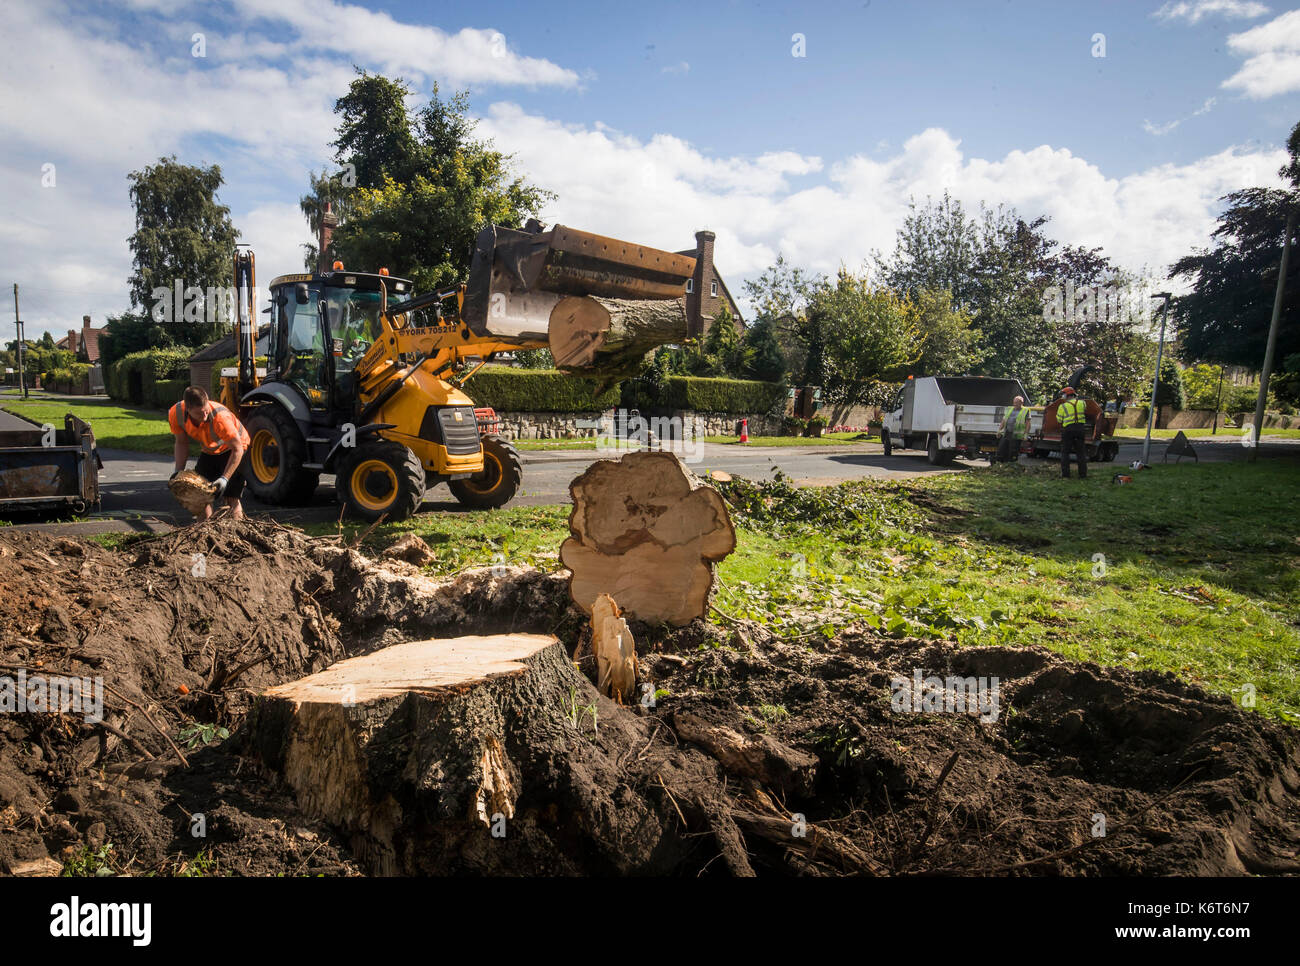 Workers remove a tree in Nether Poppleton, Yorkshire, felled during Storm Aileen, which brought howling gusts and heavy showers to parts of the UK. Stock Photo